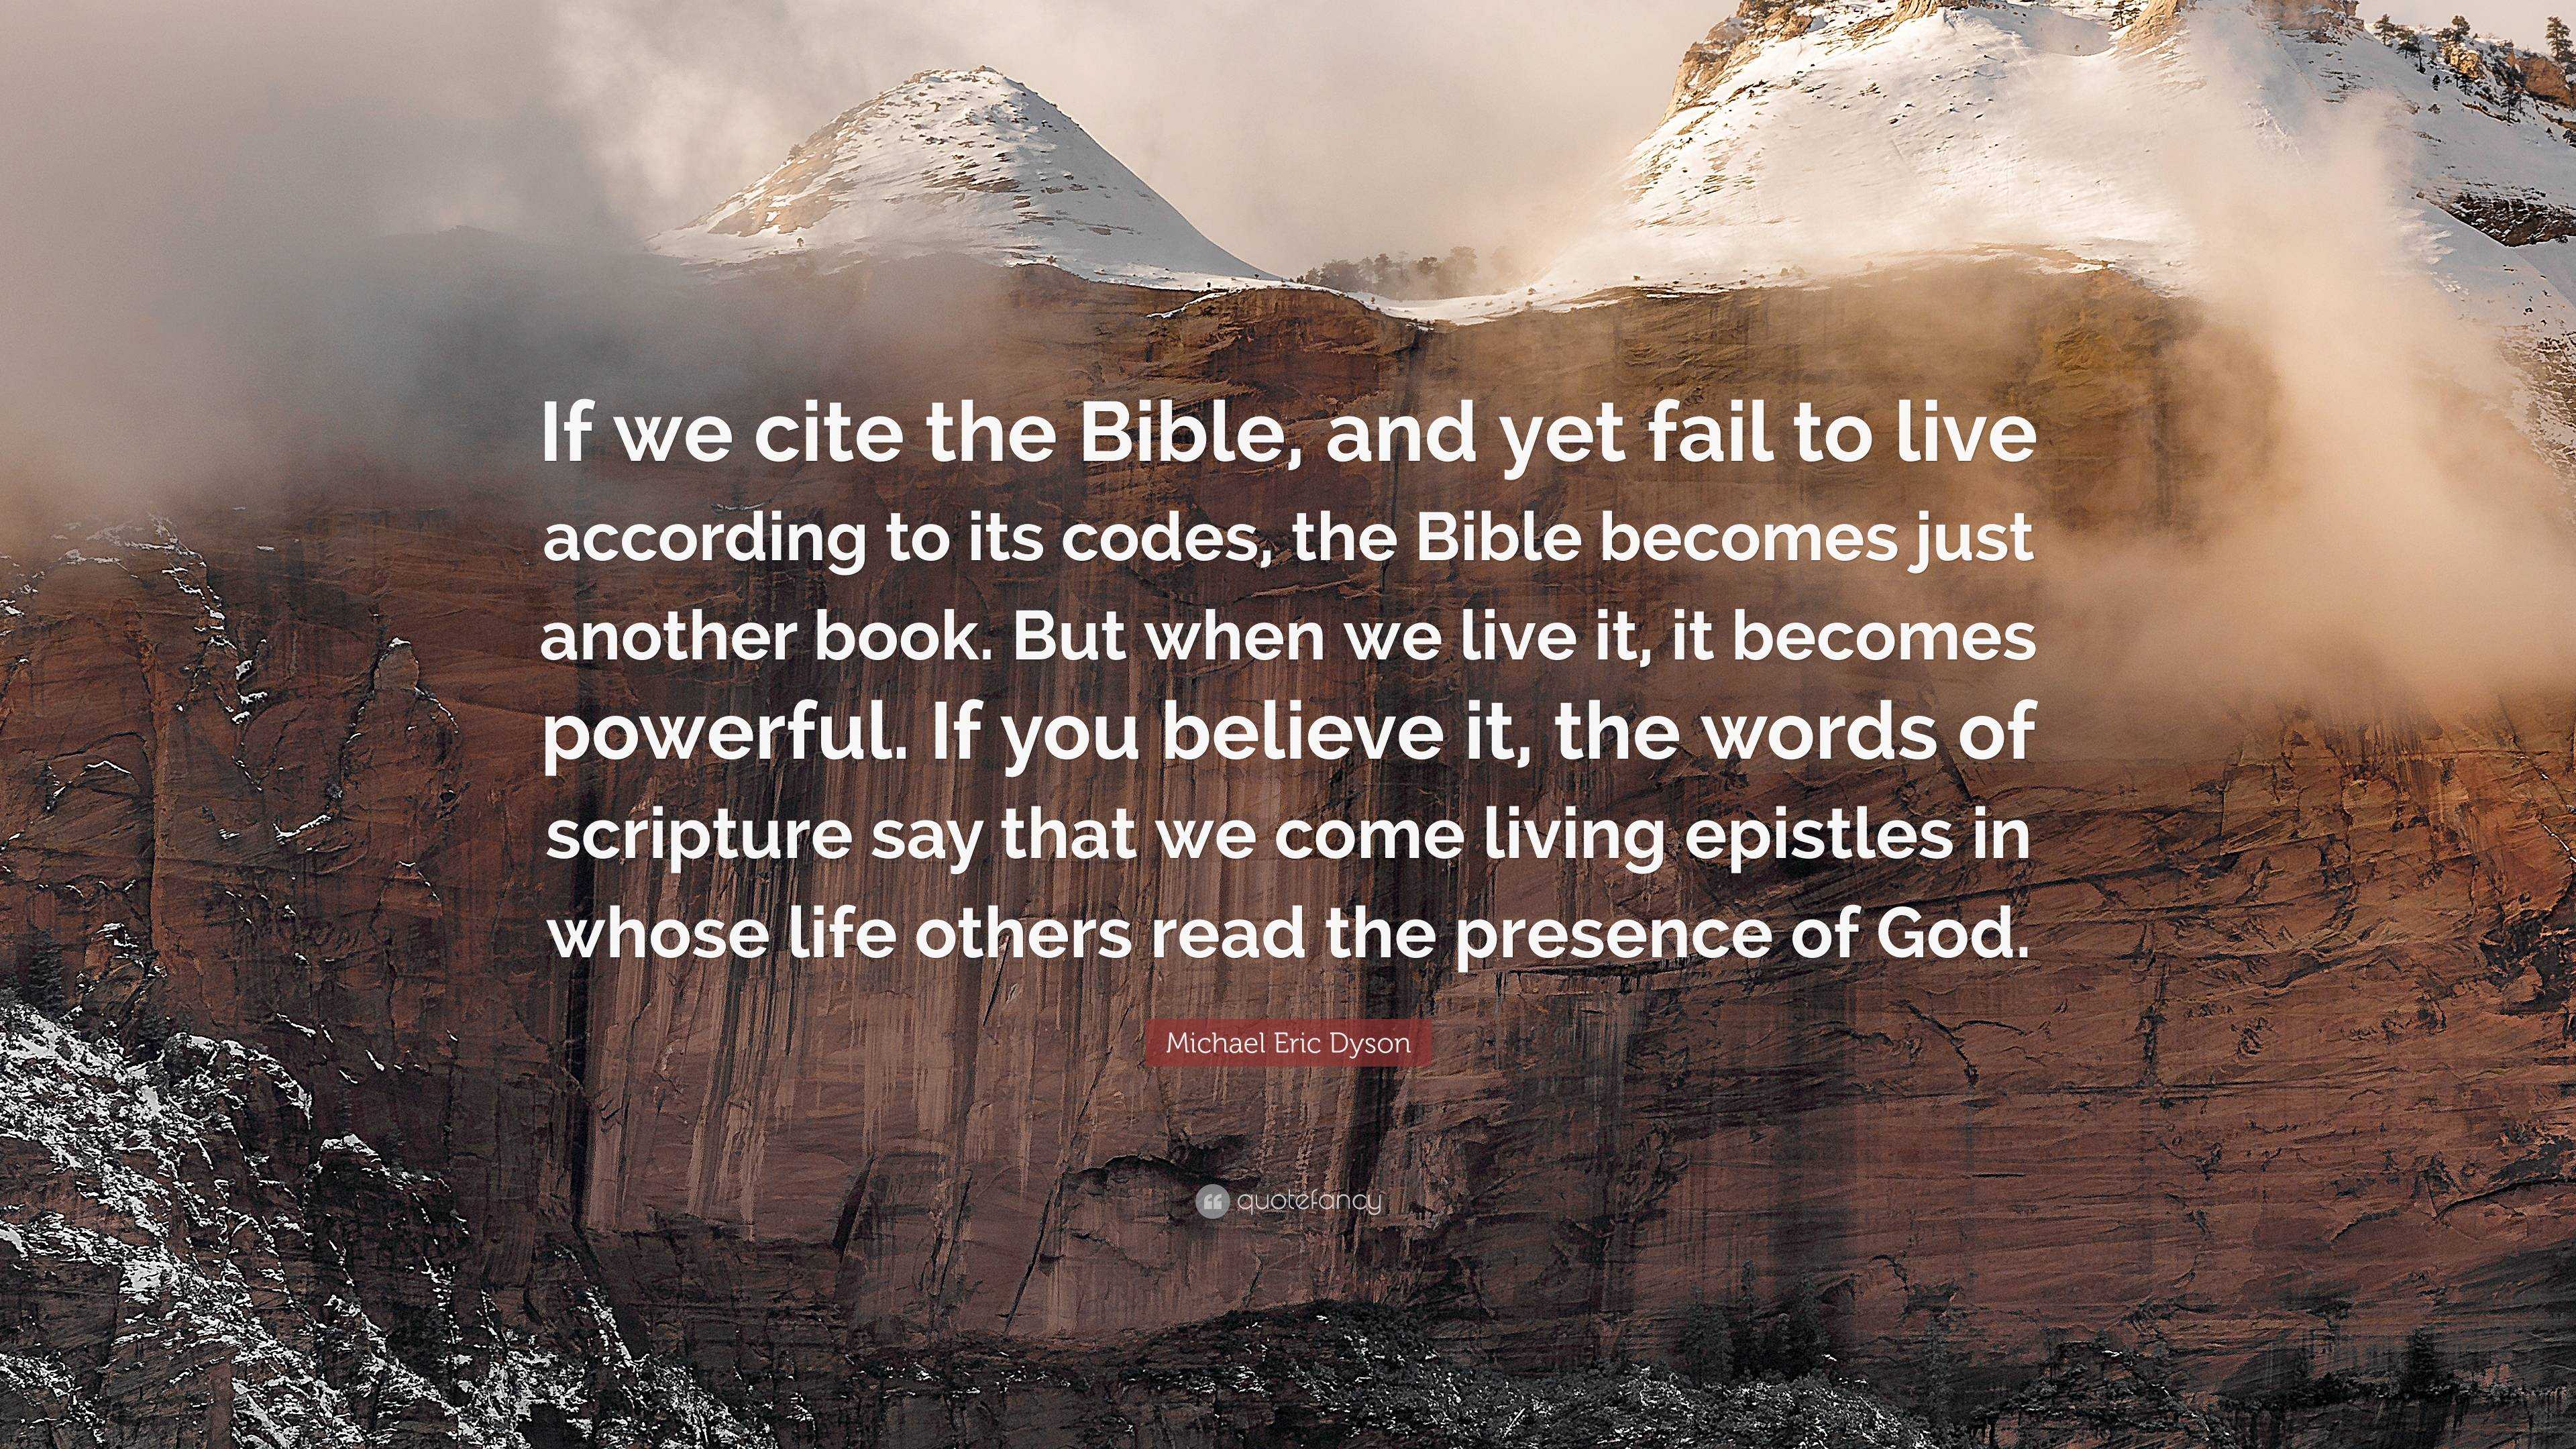 Michael Eric Dyson Quote: “If we cite the Bible, and yet fail to live ...